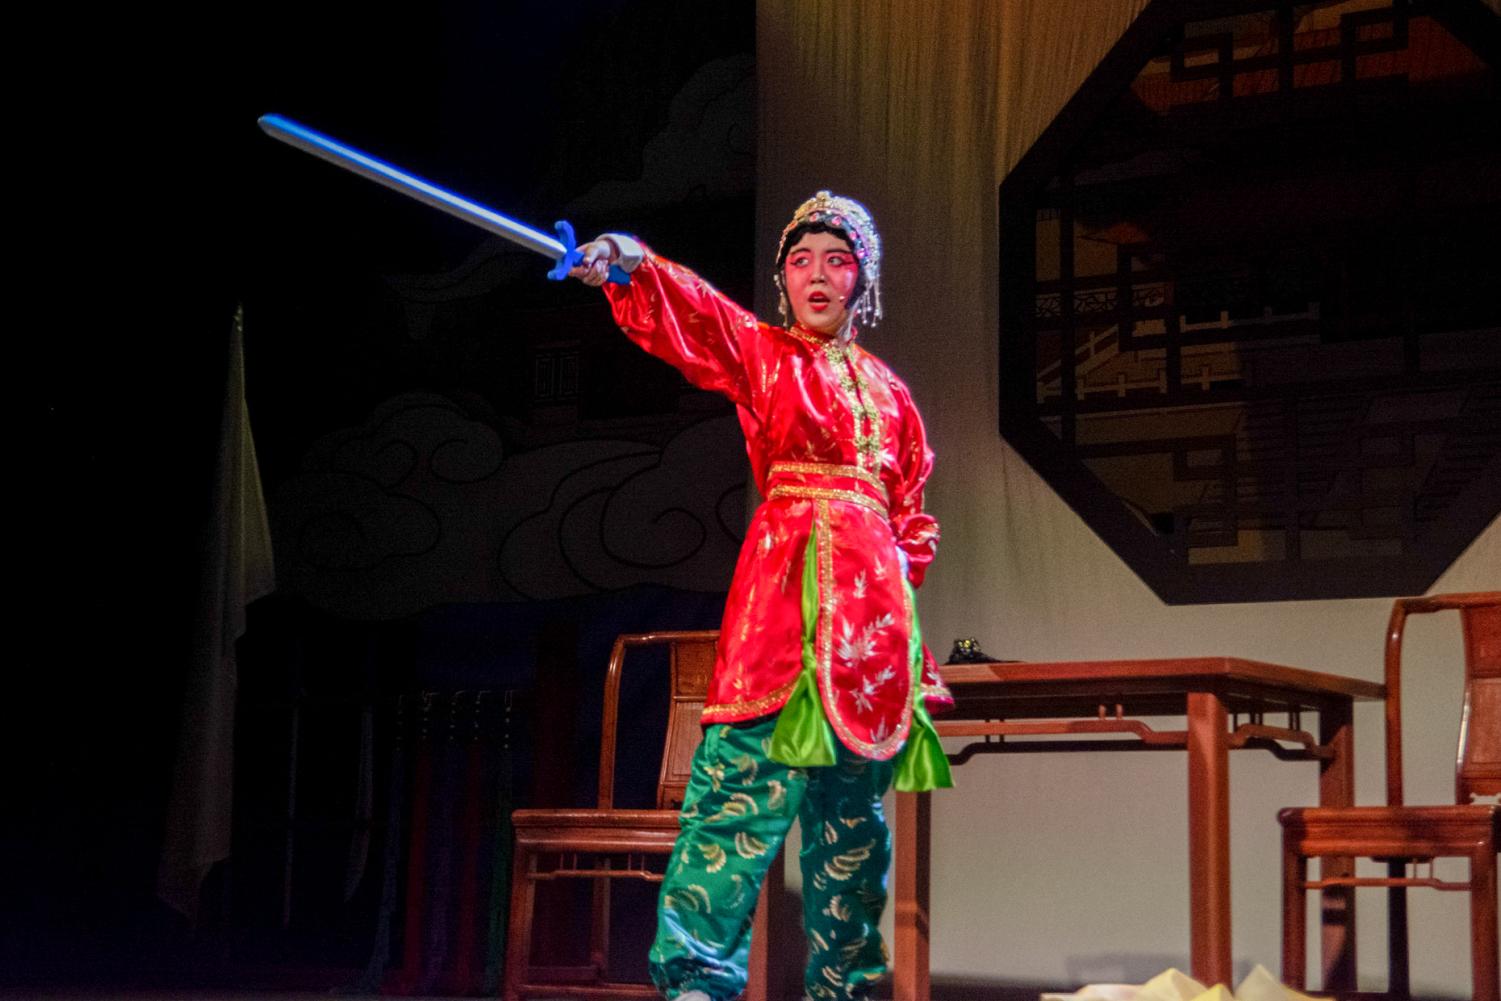 An+actress+dressed+in+red+and+green+traditional+Chinese+dress+stands+onstage+and+points+a+sword+toward+the+audience.